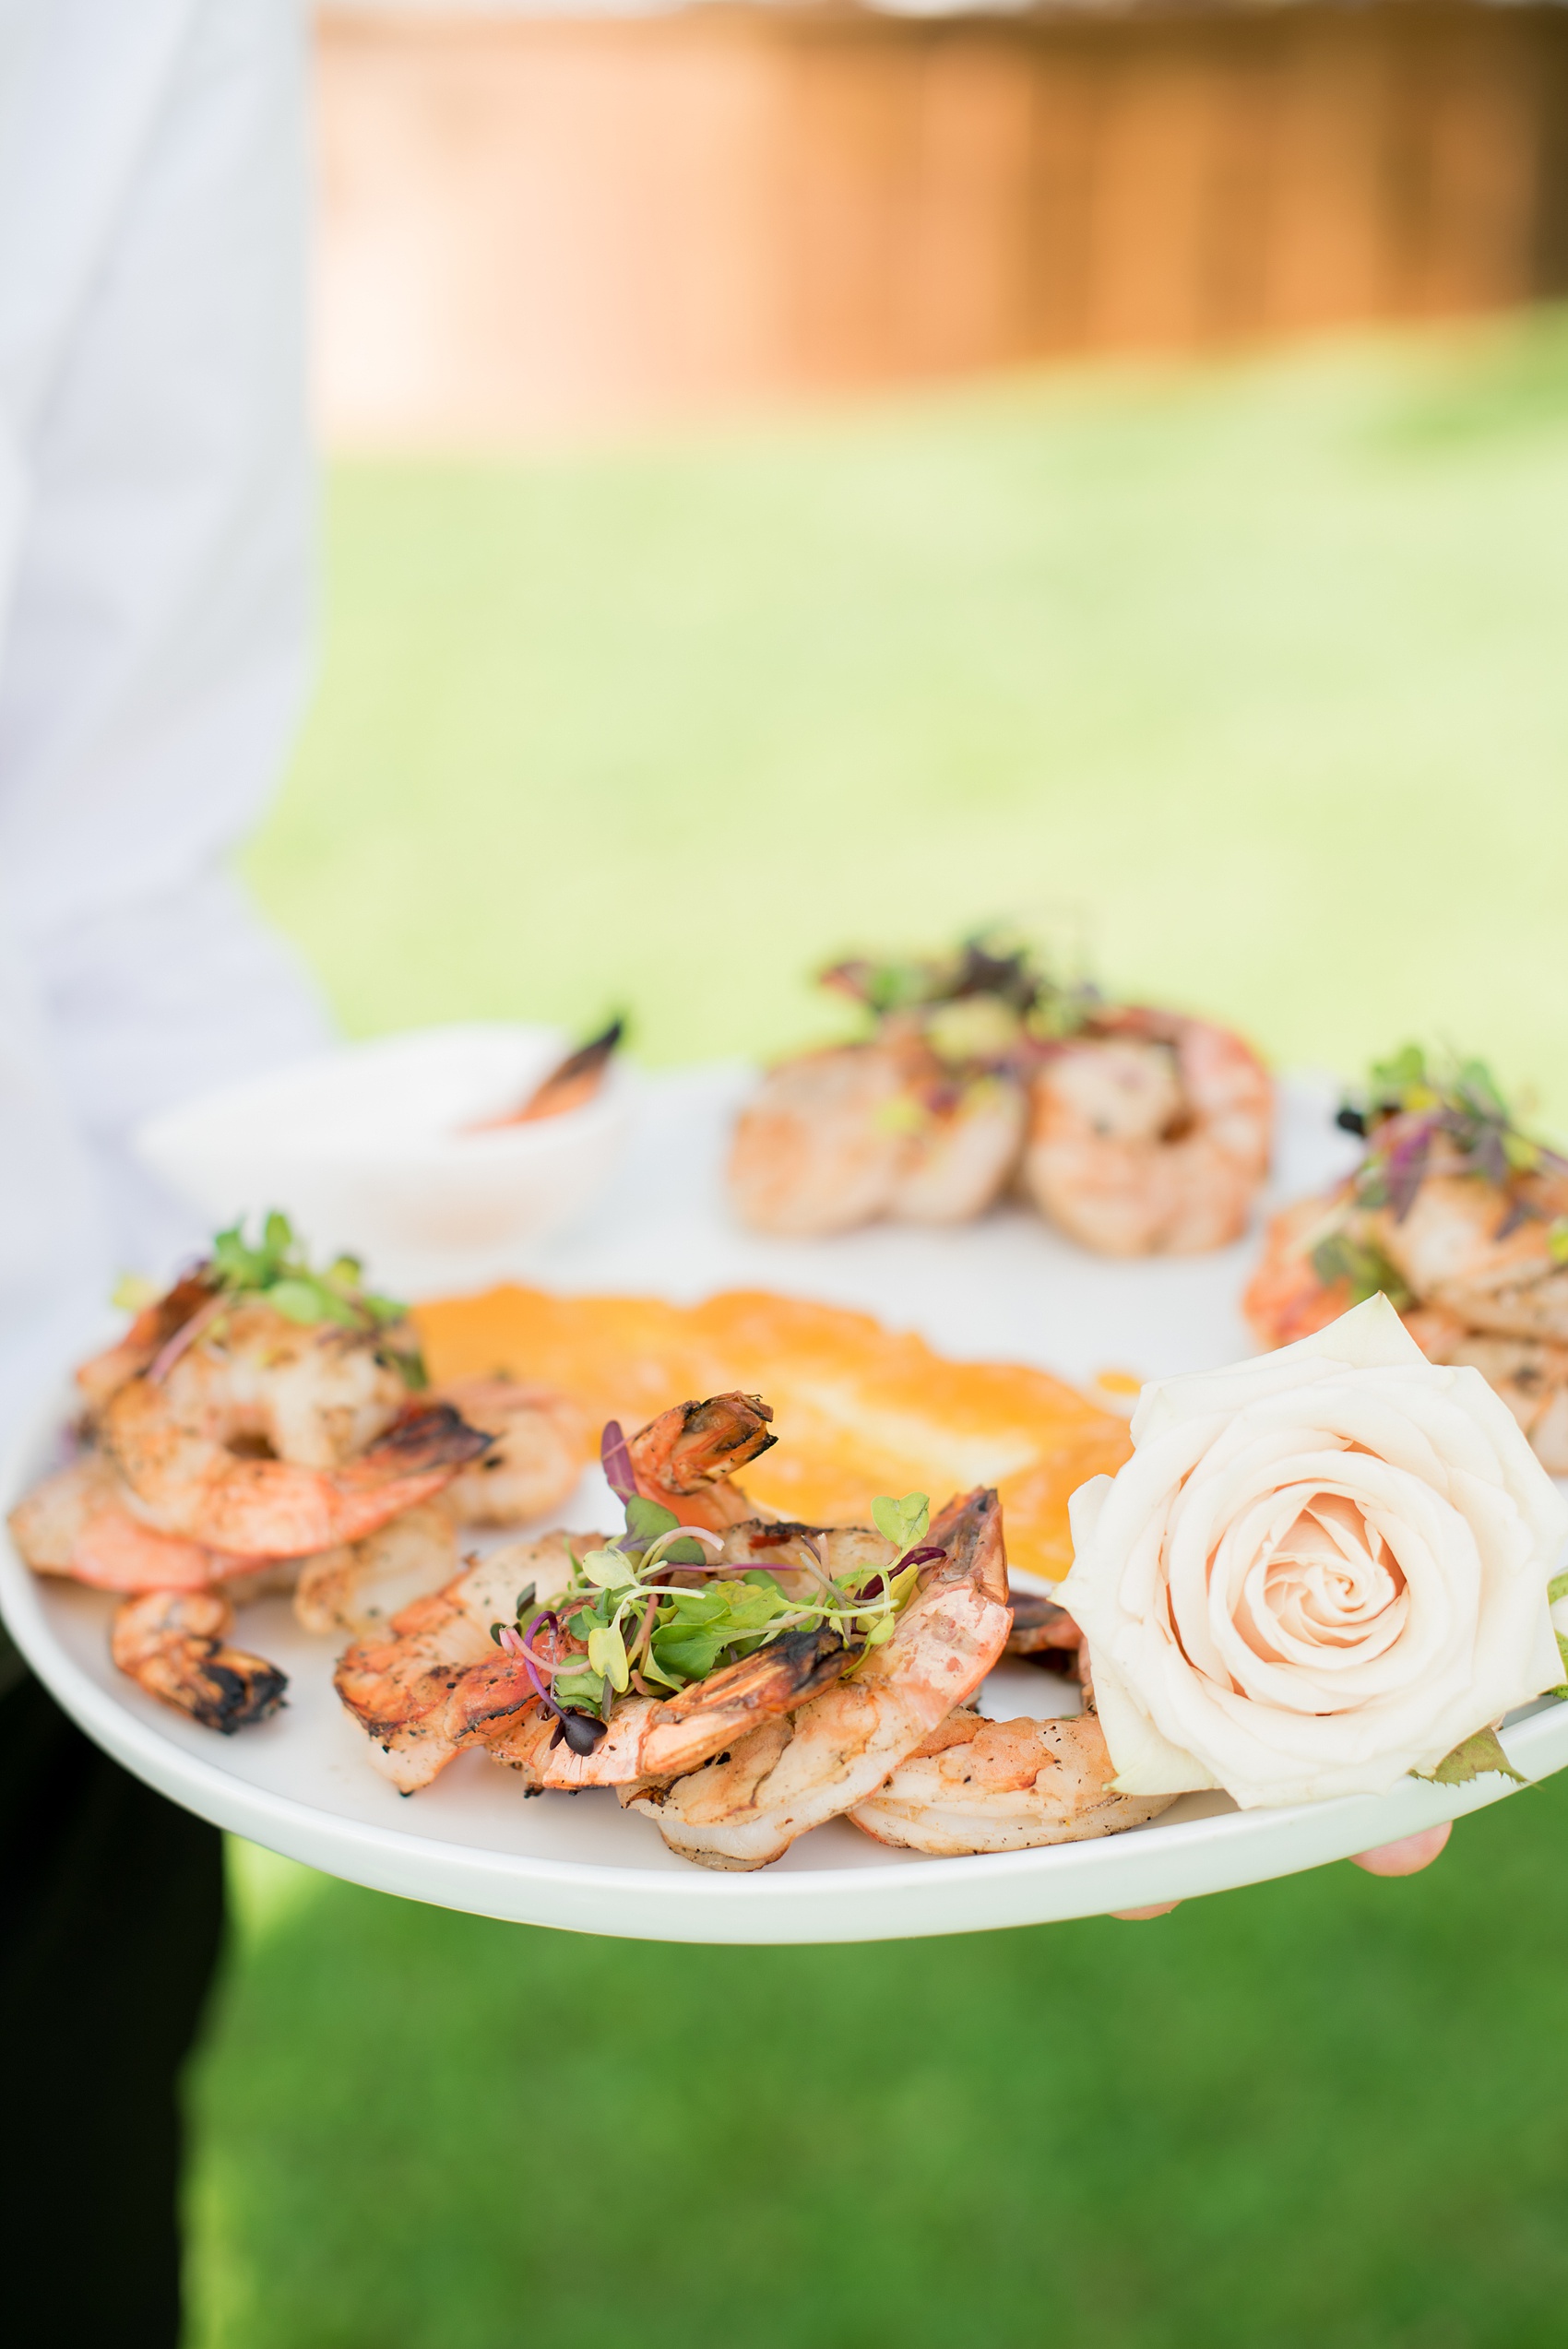 Mikkel Paige Photography photos from a Southwood Estate Wedding in Germantown, New York in the Hudson Valley. Picture of a shrimp passed hors d'oeuvre.